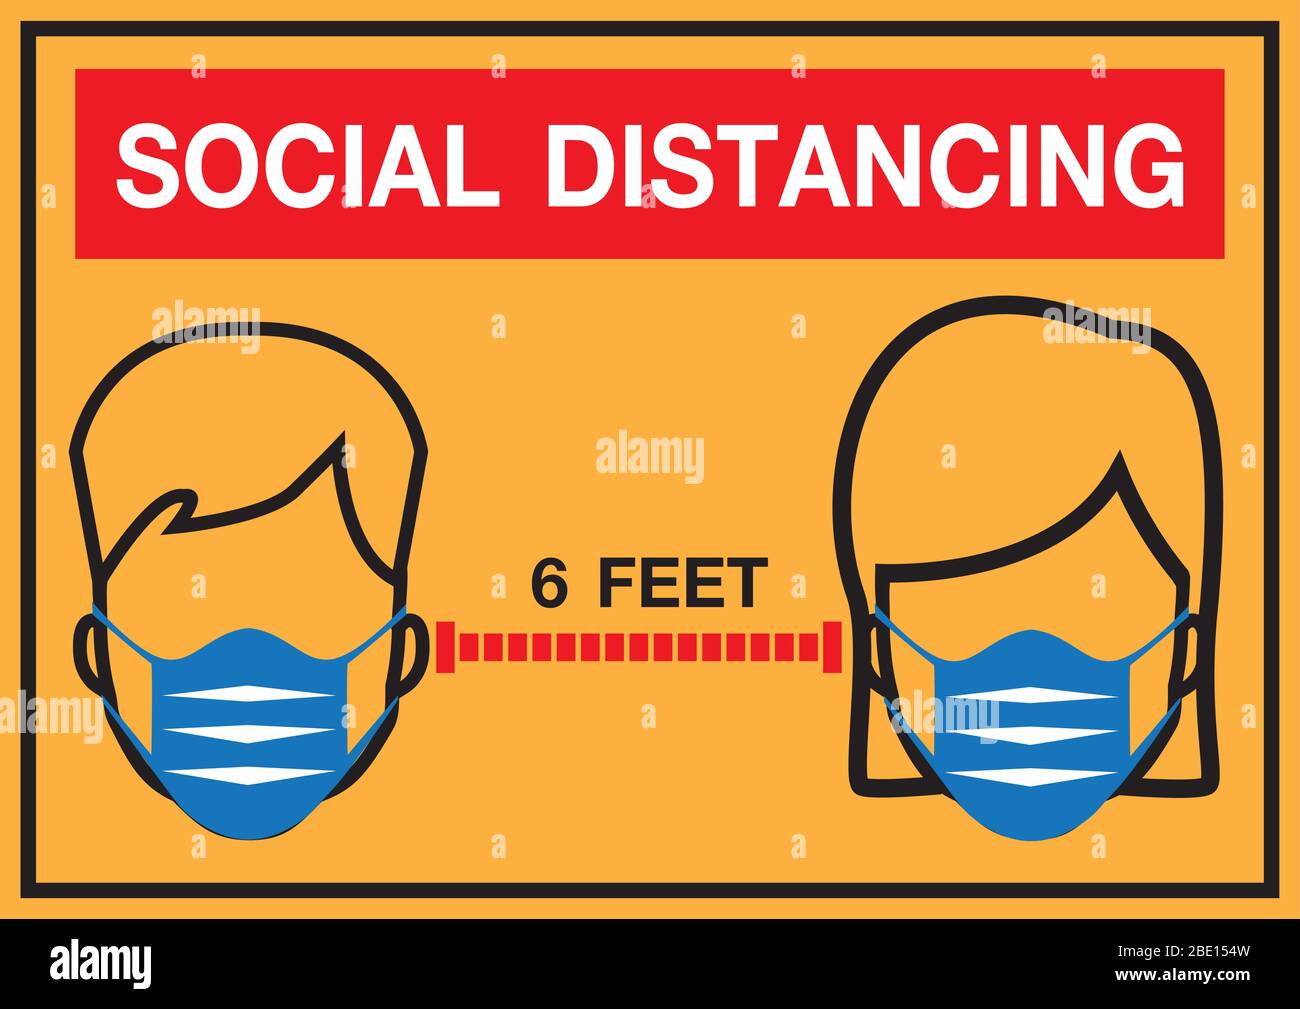 social distancing vector illustration design. keep distance in public society people to protect from COVID-19. Stock Vector